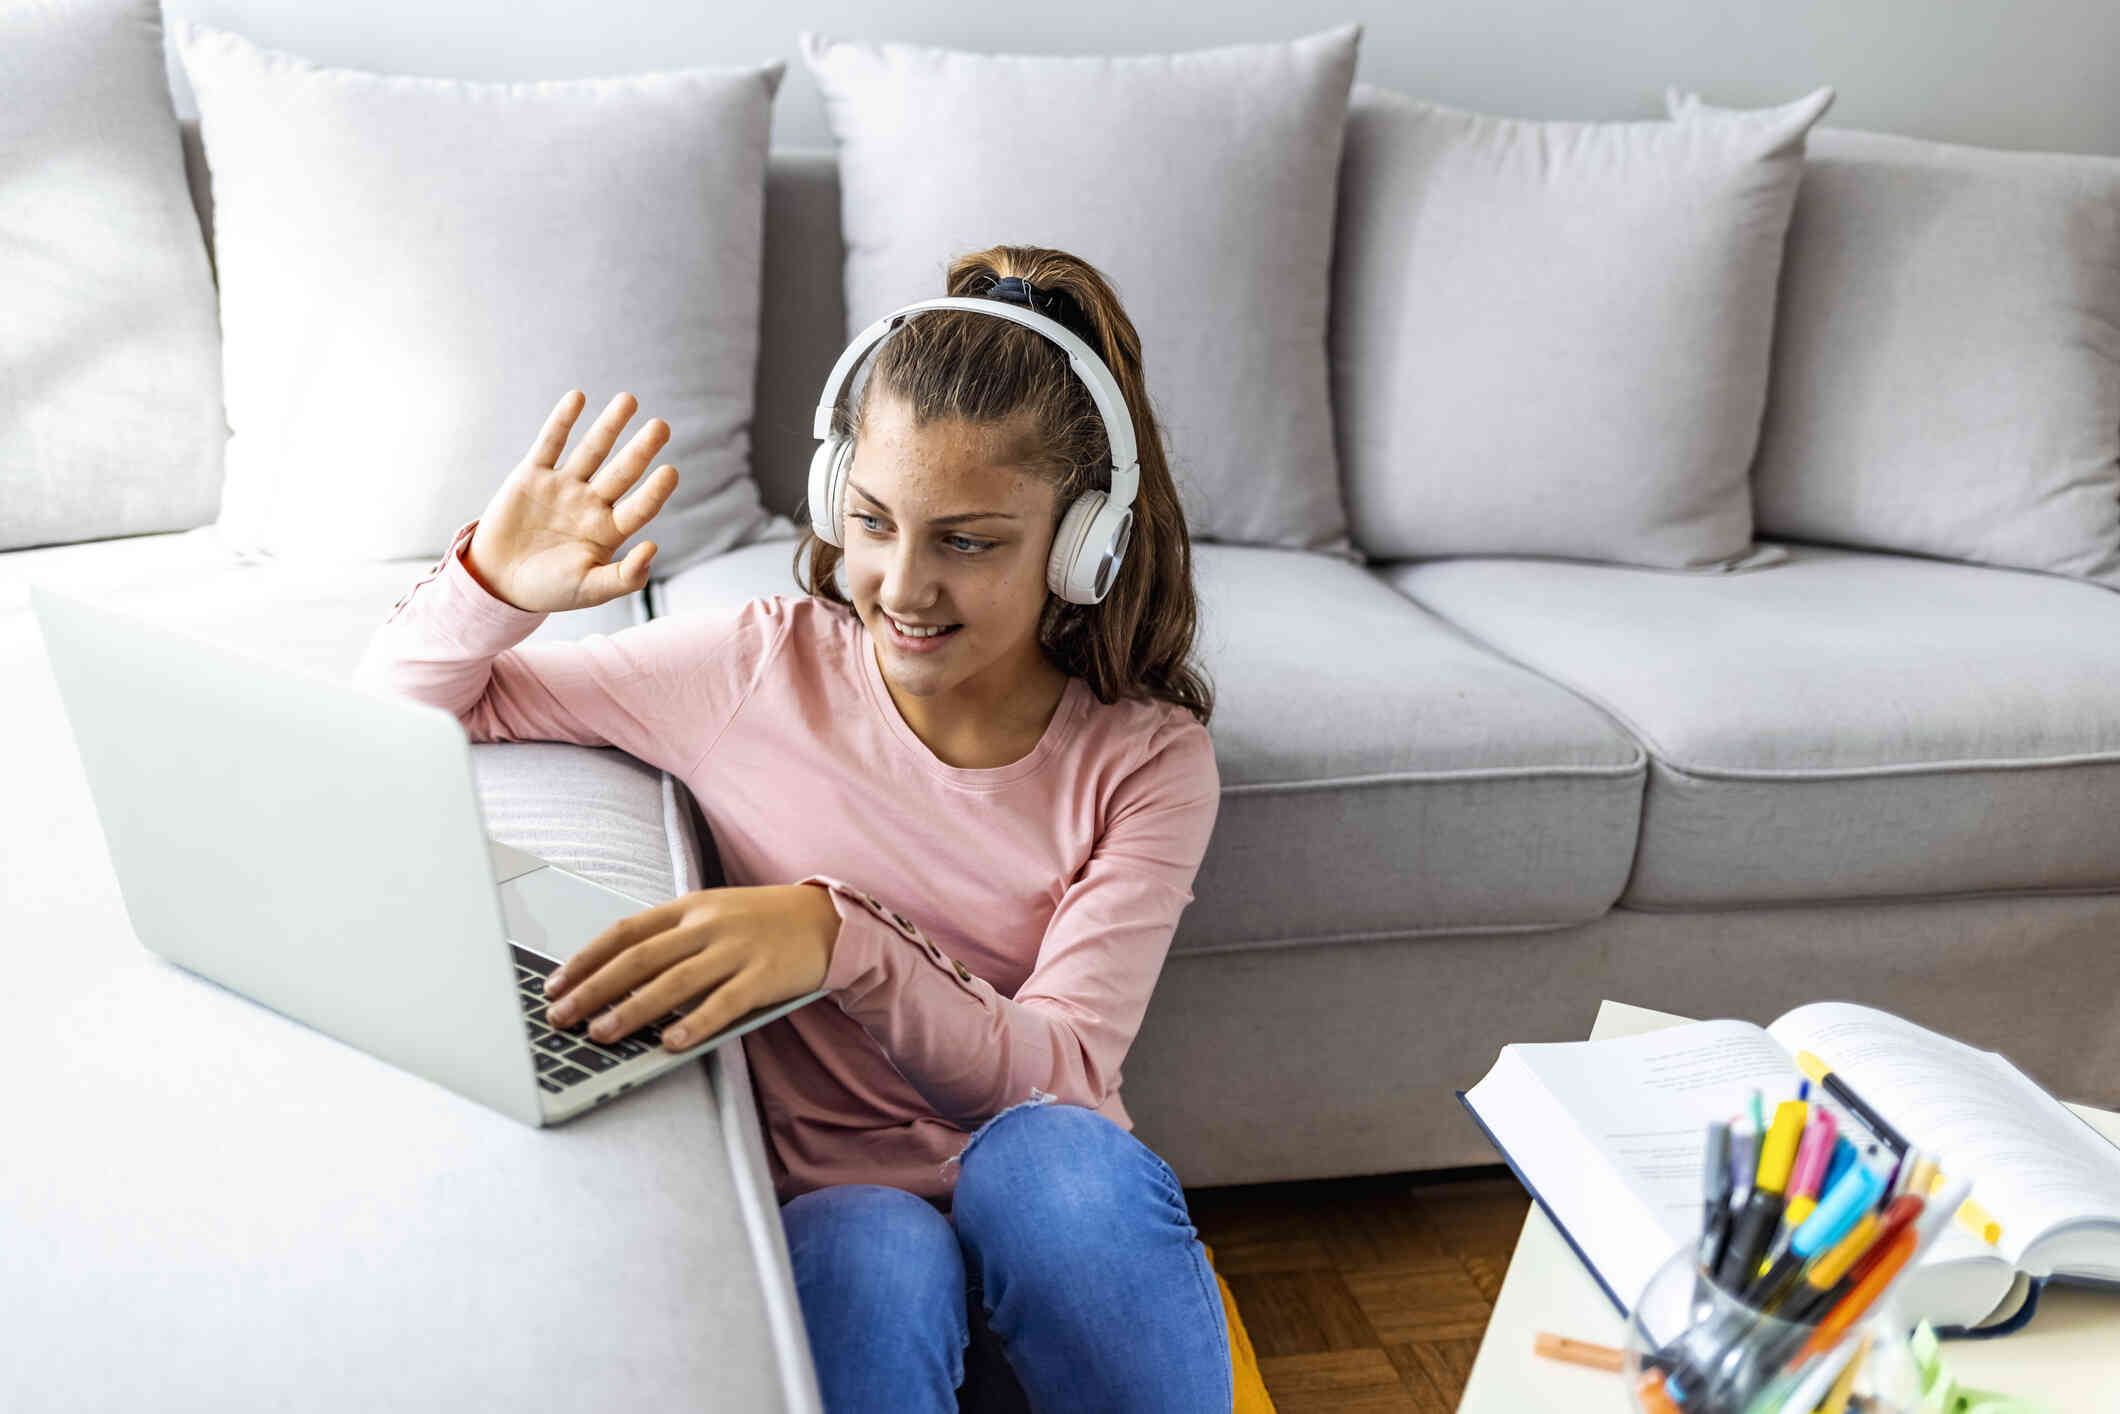 A teen girl in a pink shirt sits on the floor next to the couch while wearing white headphones as she waves at the laptop screen on the couch infront of her with her study books on the coffee table.